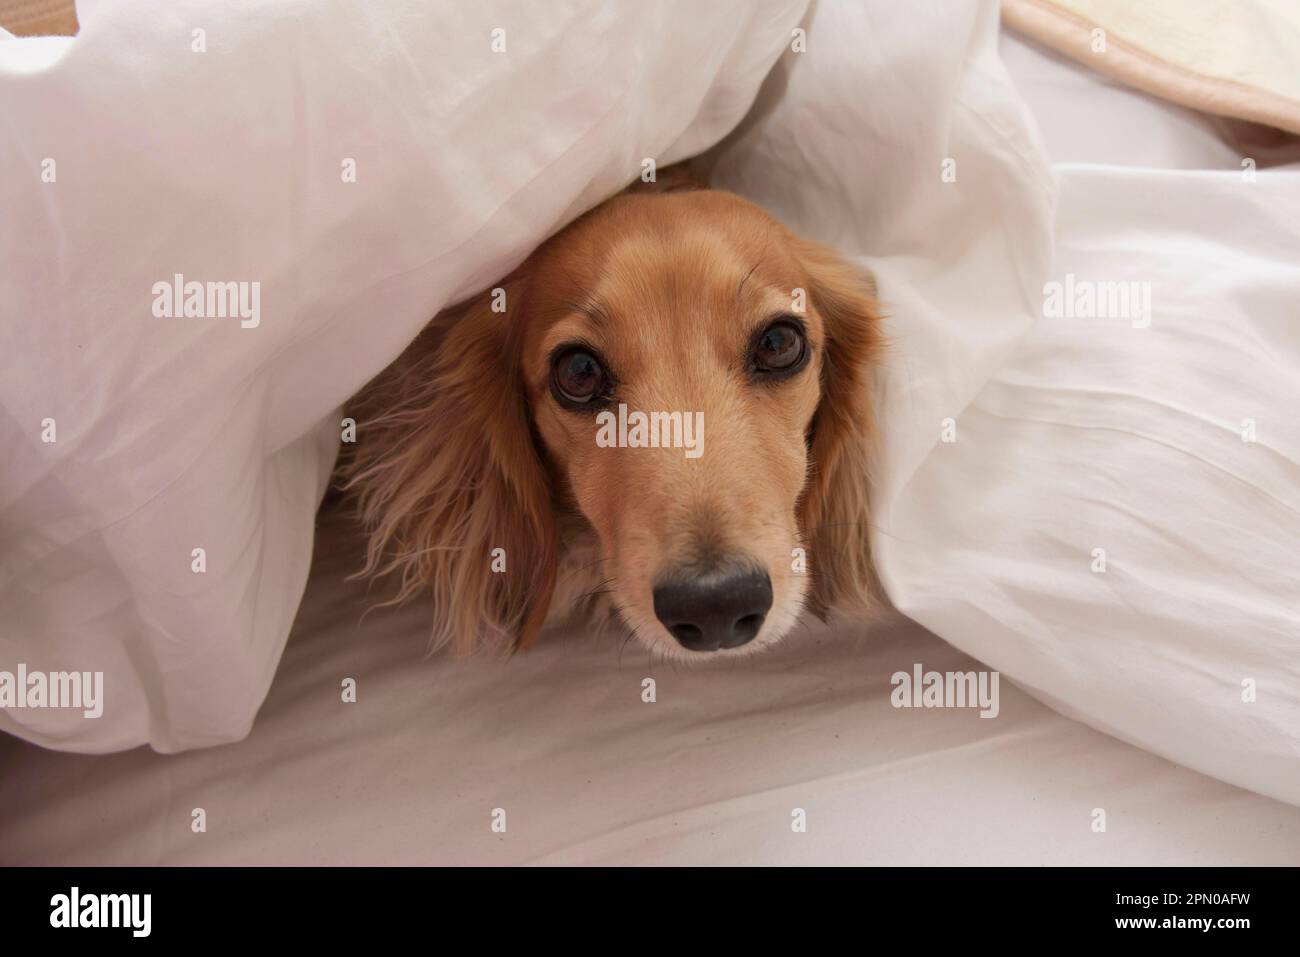 Domestic dog, long-haired miniature dachshund, adult, peeping out from under the bed sheet, England, United Kingdom Stock Photo